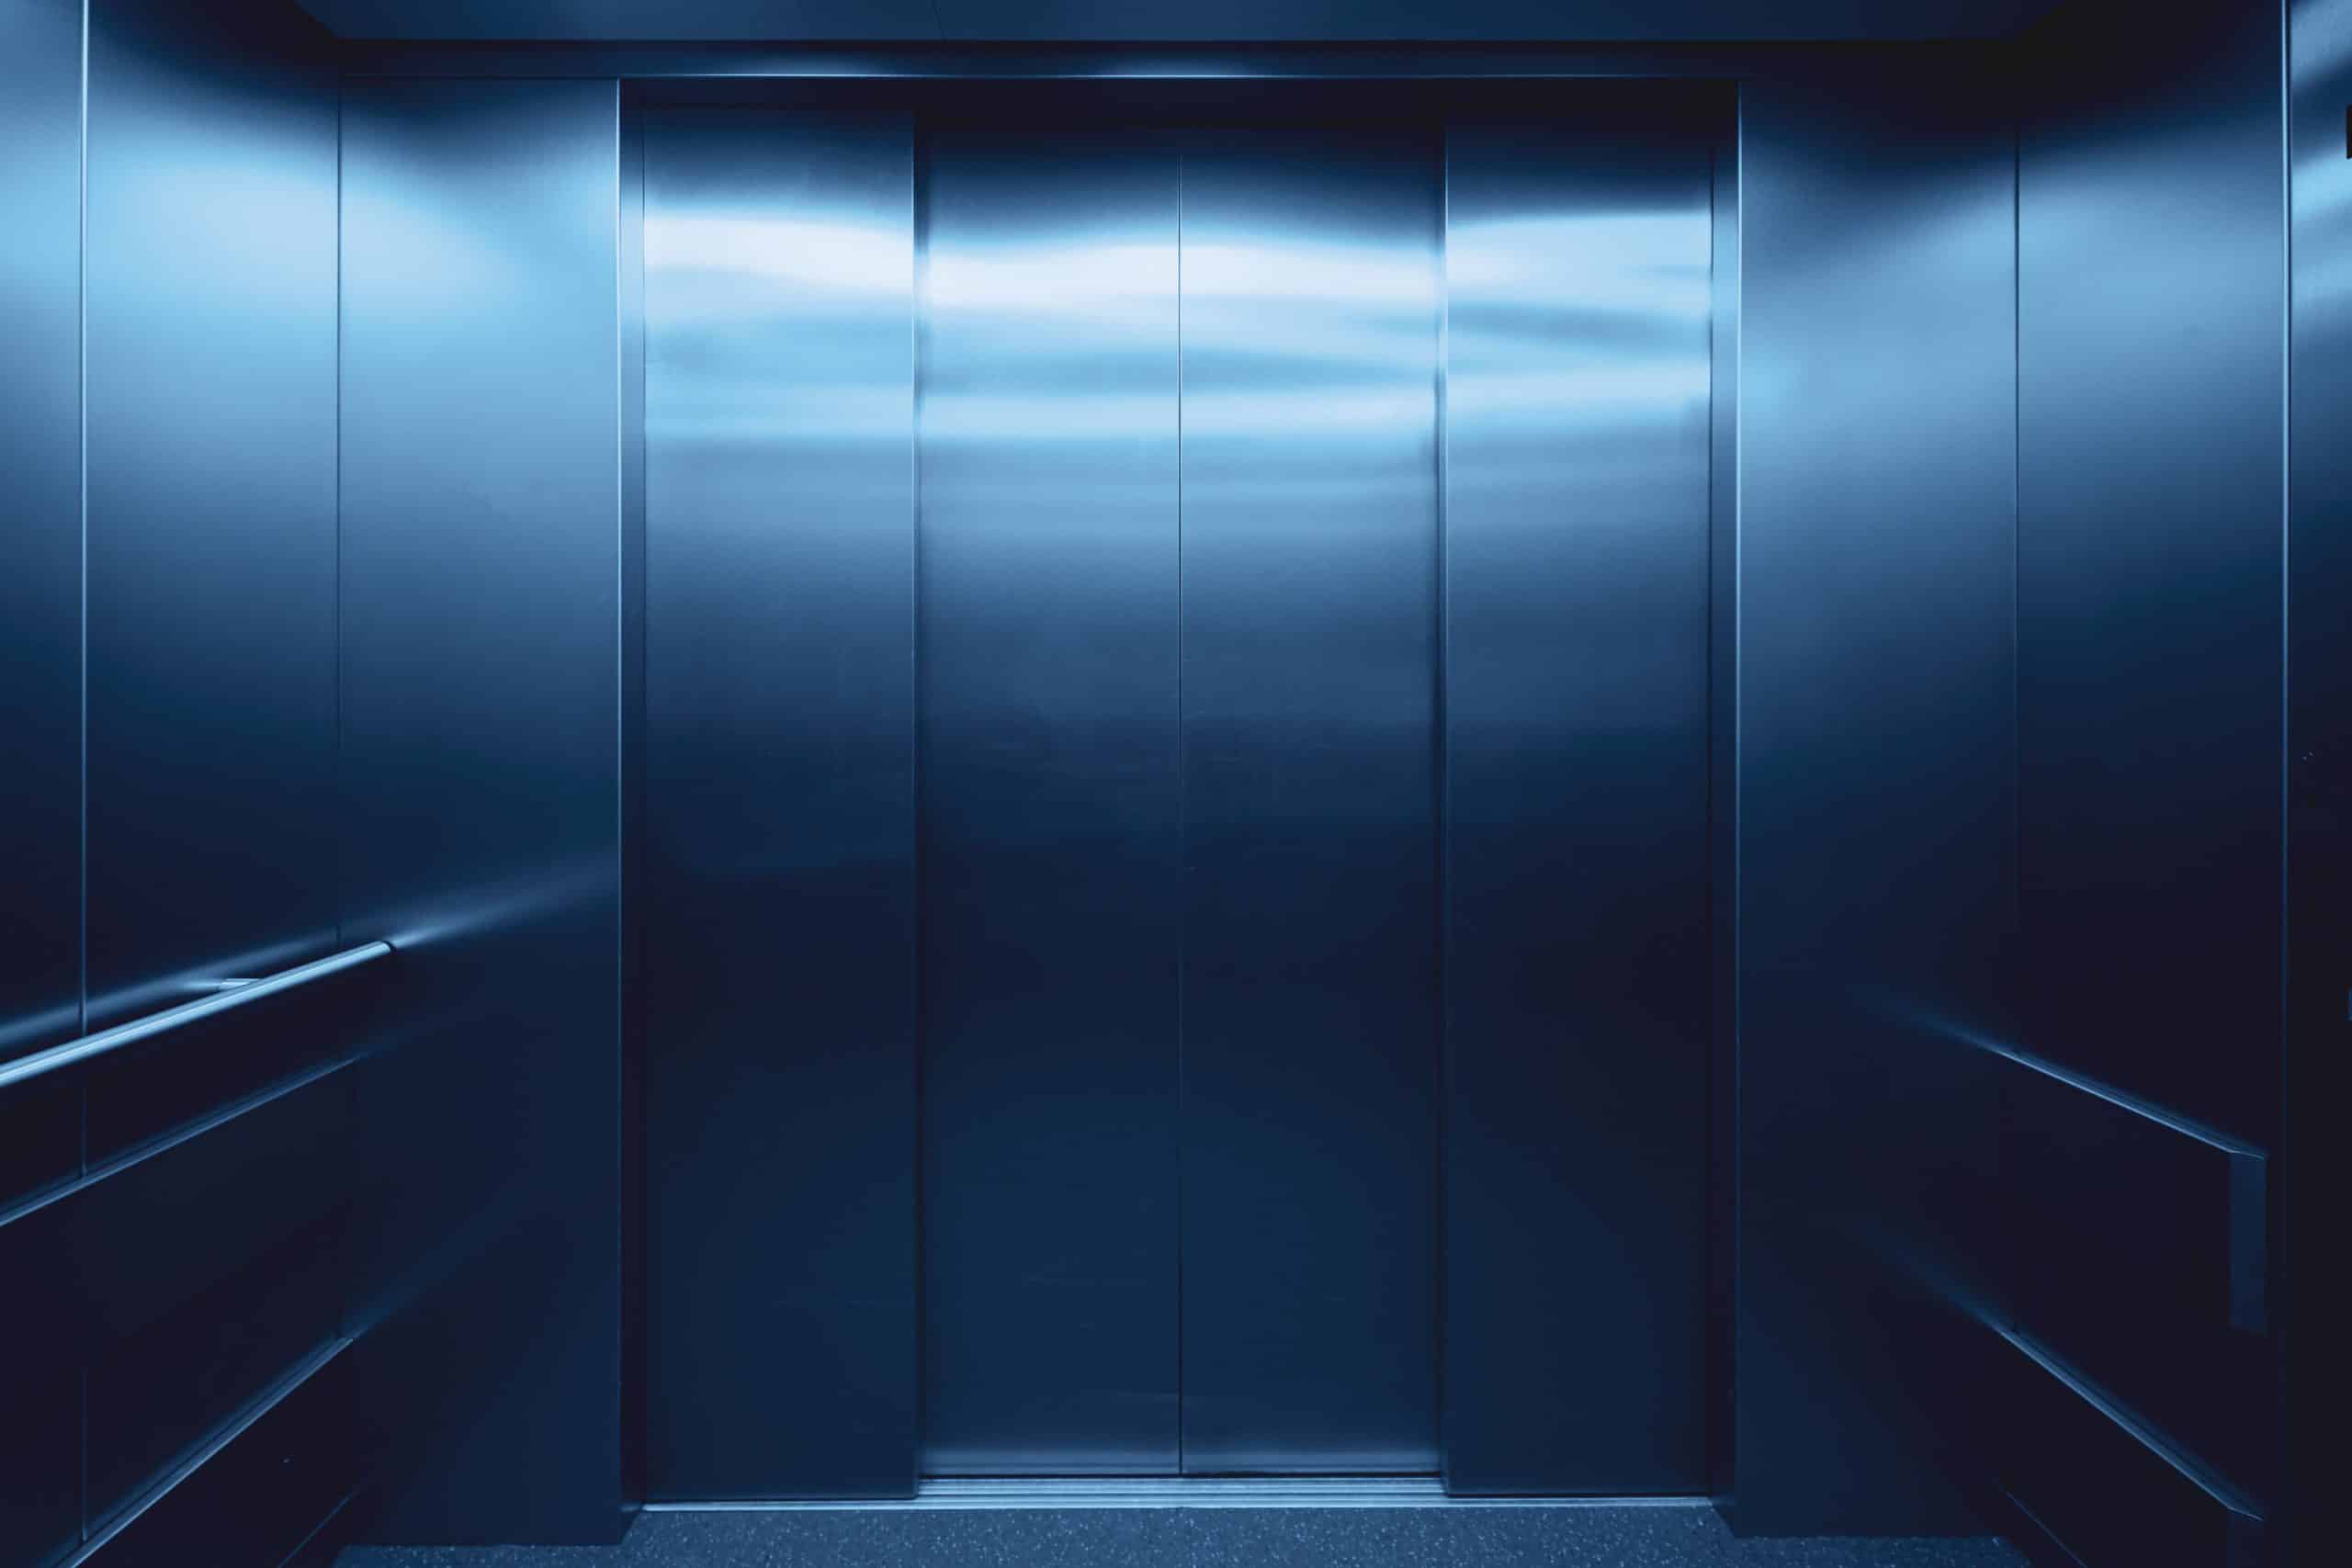 The interior of an elevator representing the employer of a senior employee who was terminated for cause